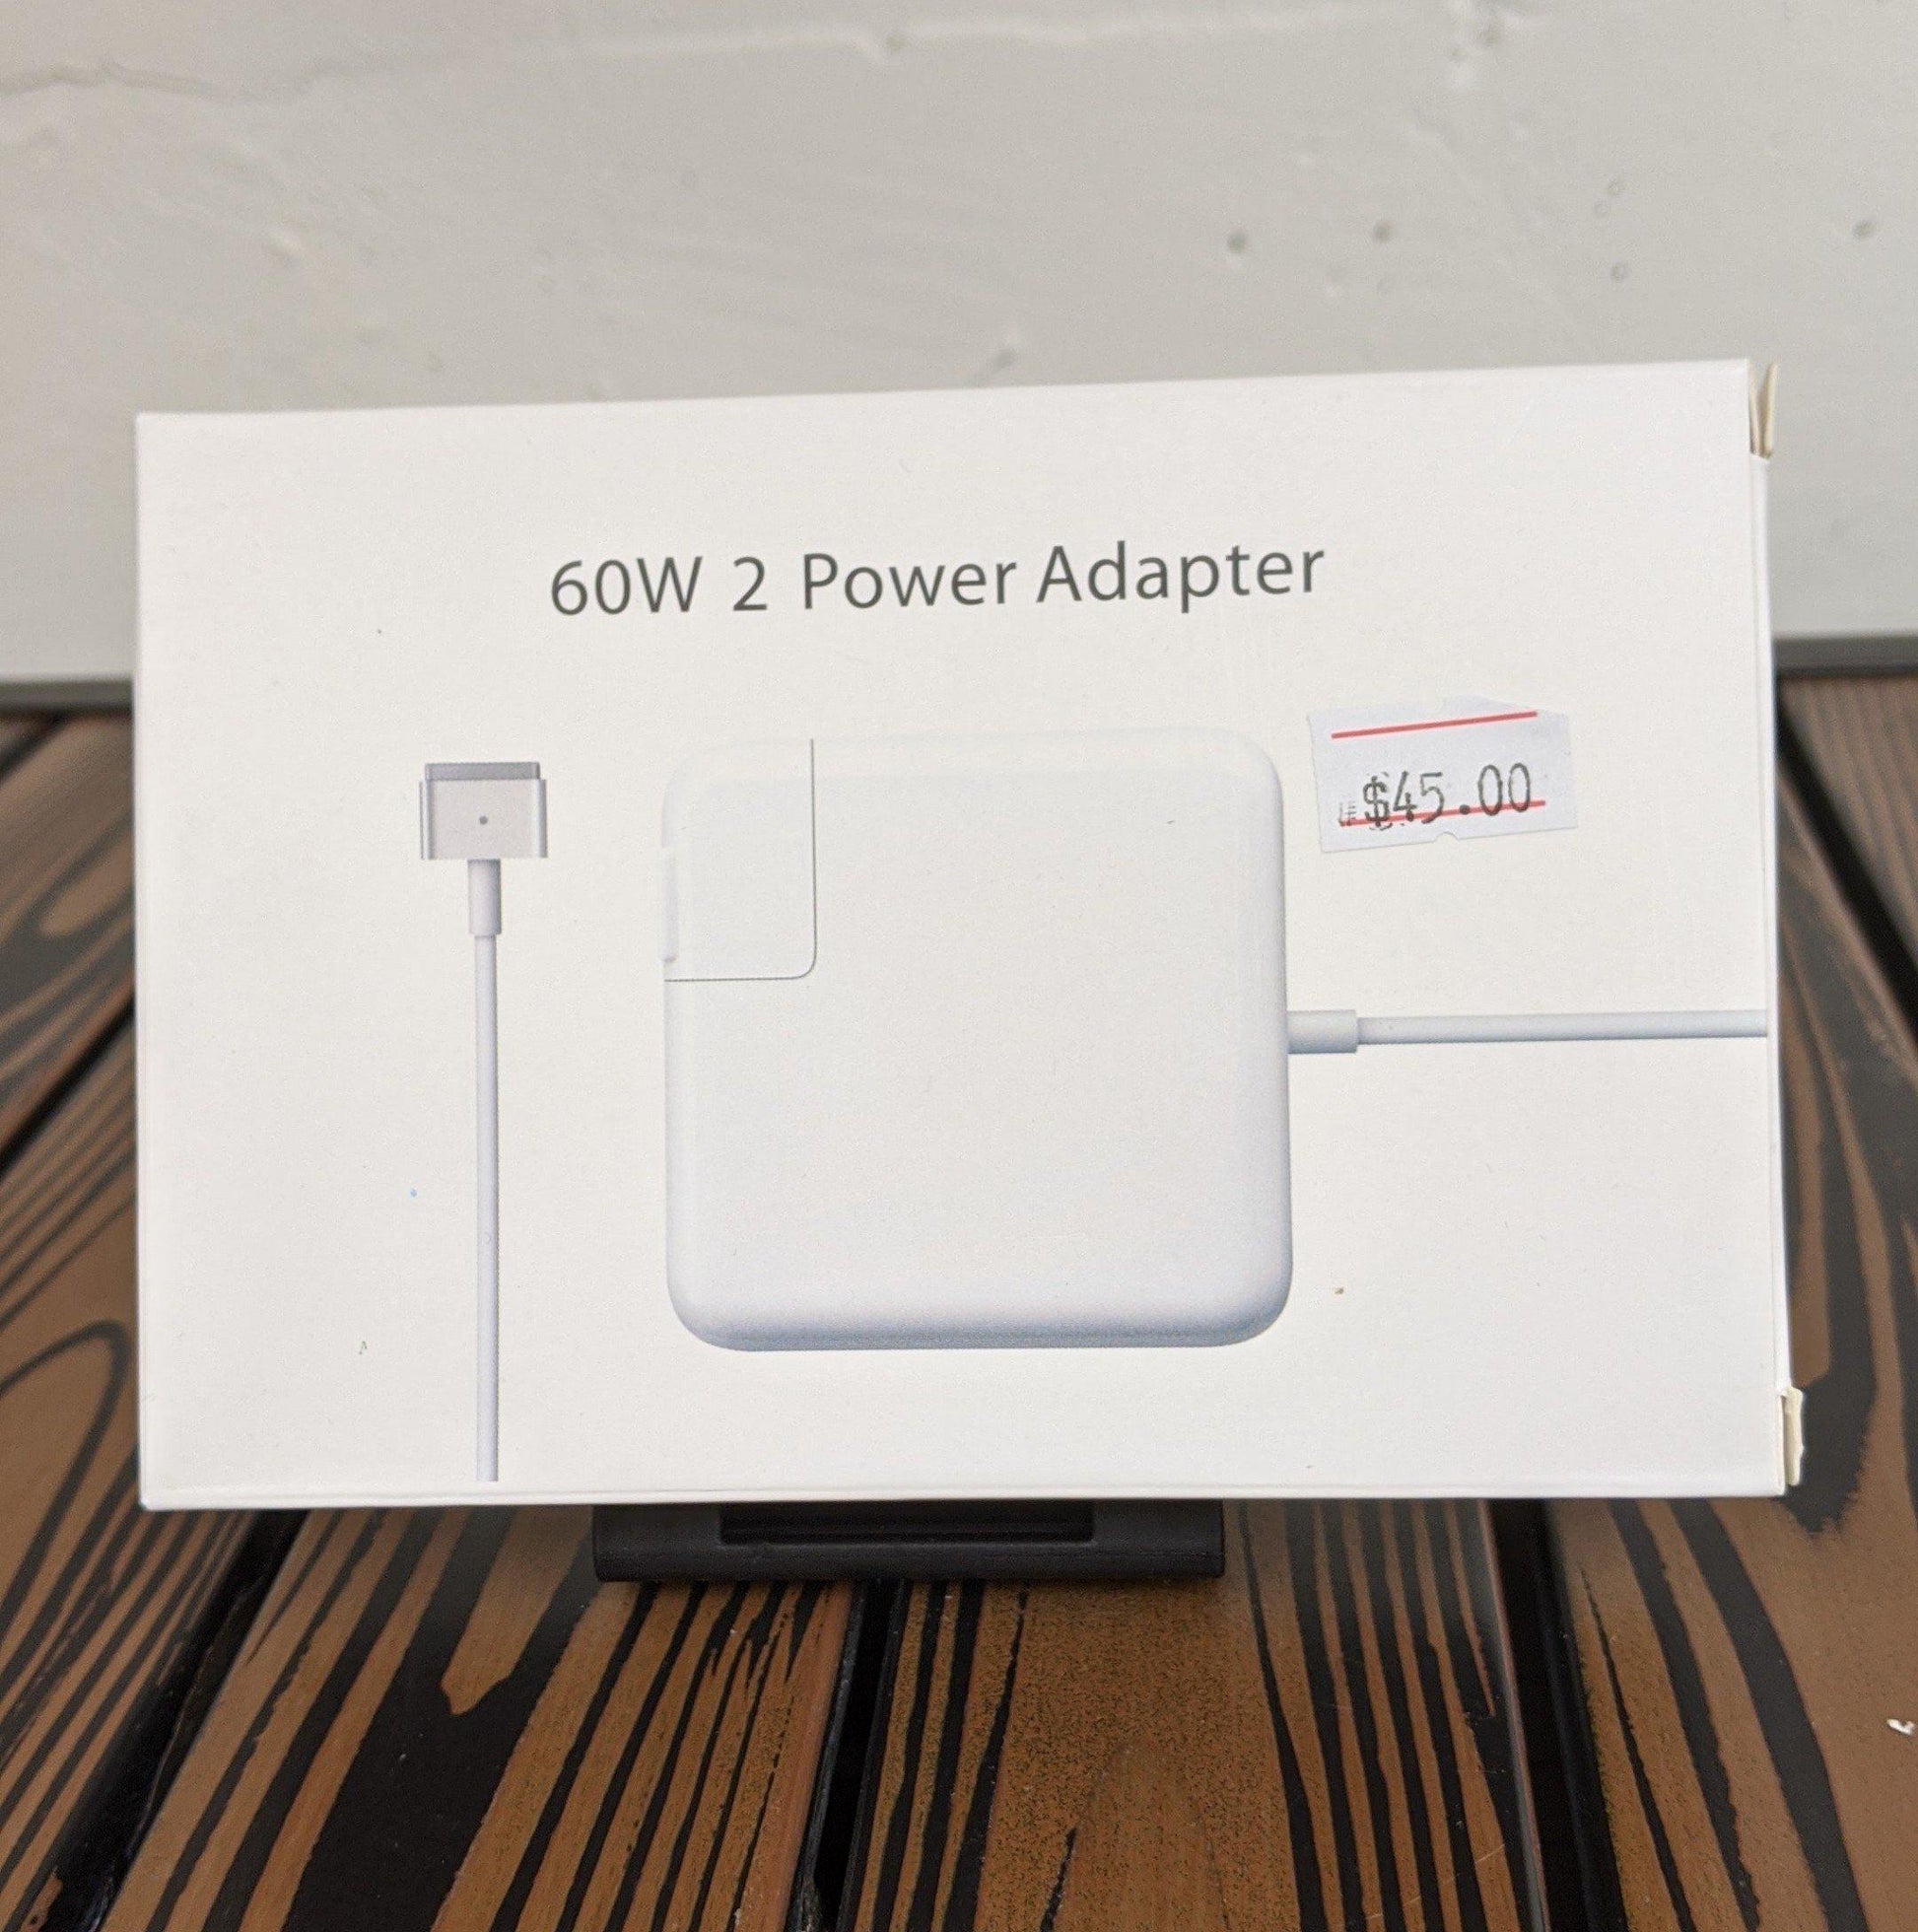 MagSafe 2 Power Charger Adapter for Apple MacBook - 60W - PCMaster Pro 